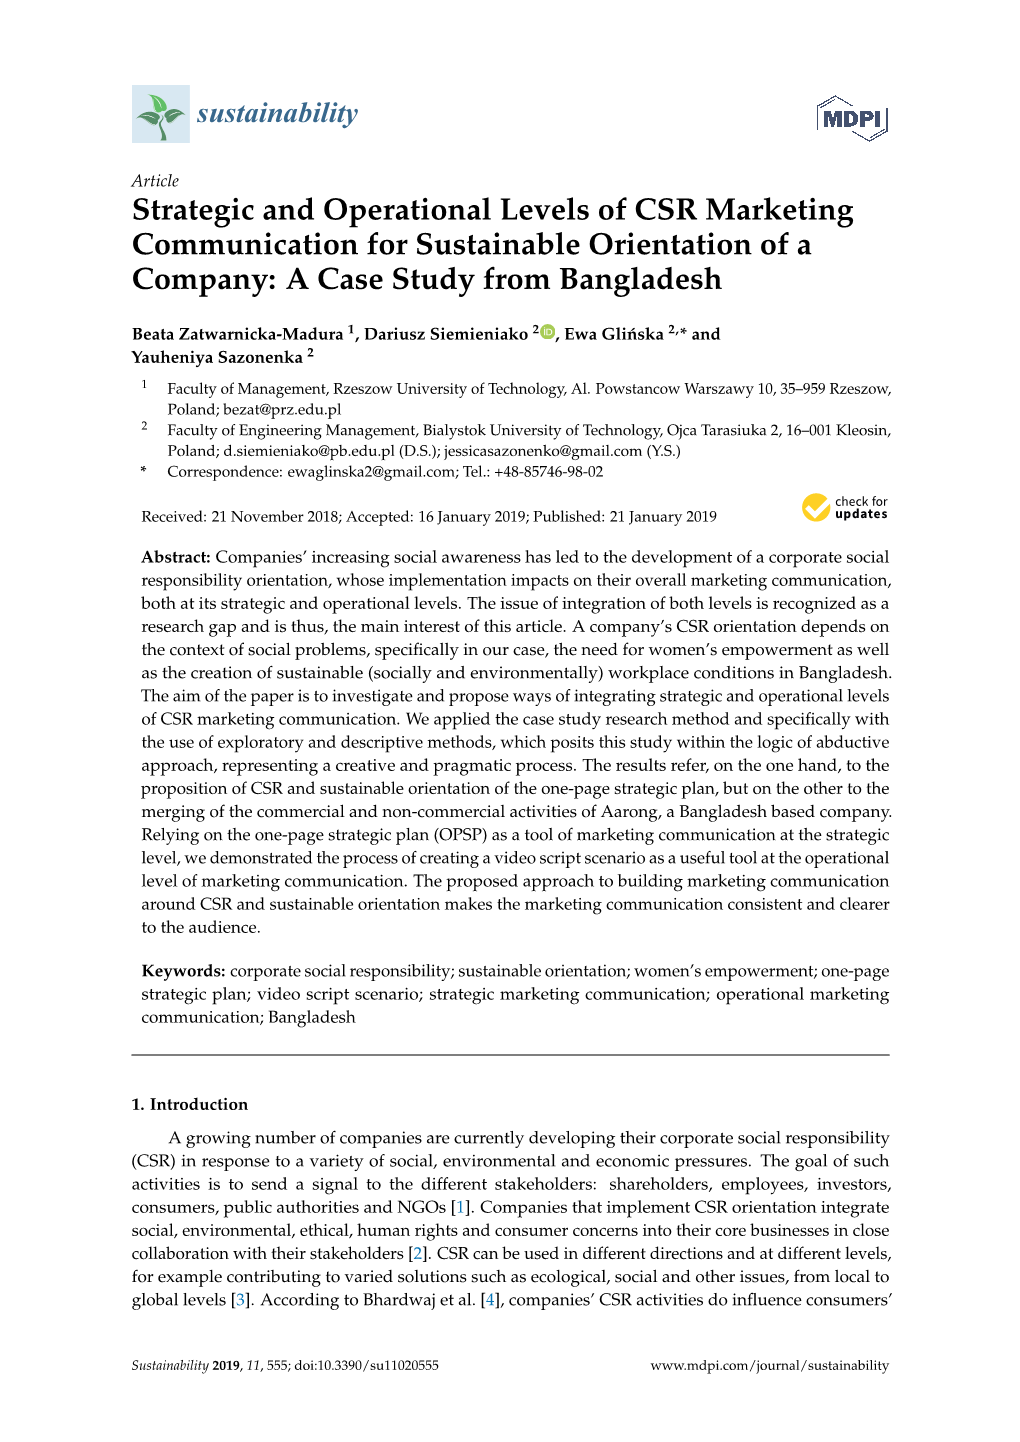 Strategic and Operational Levels of CSR Marketing Communication for Sustainable Orientation of a Company: a Case Study from Bangladesh